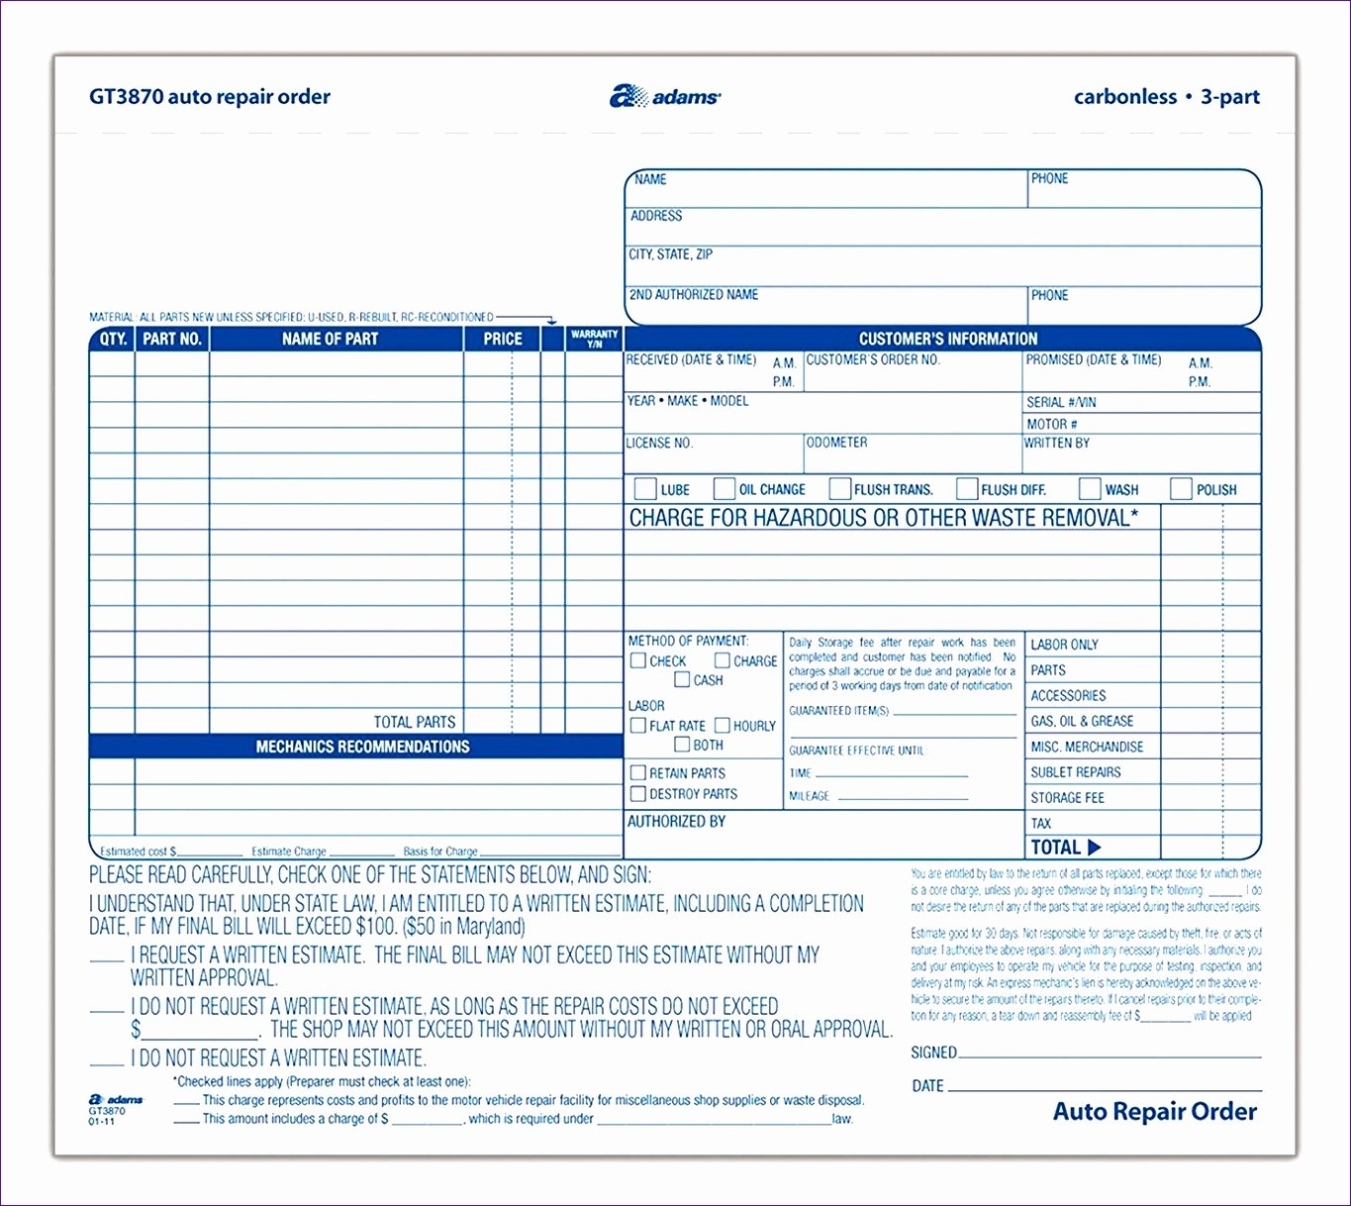 40 Auto Repair Invoice Template Free | Markmeckler Template Design intended for Free Auto Repair Invoice Template Excel